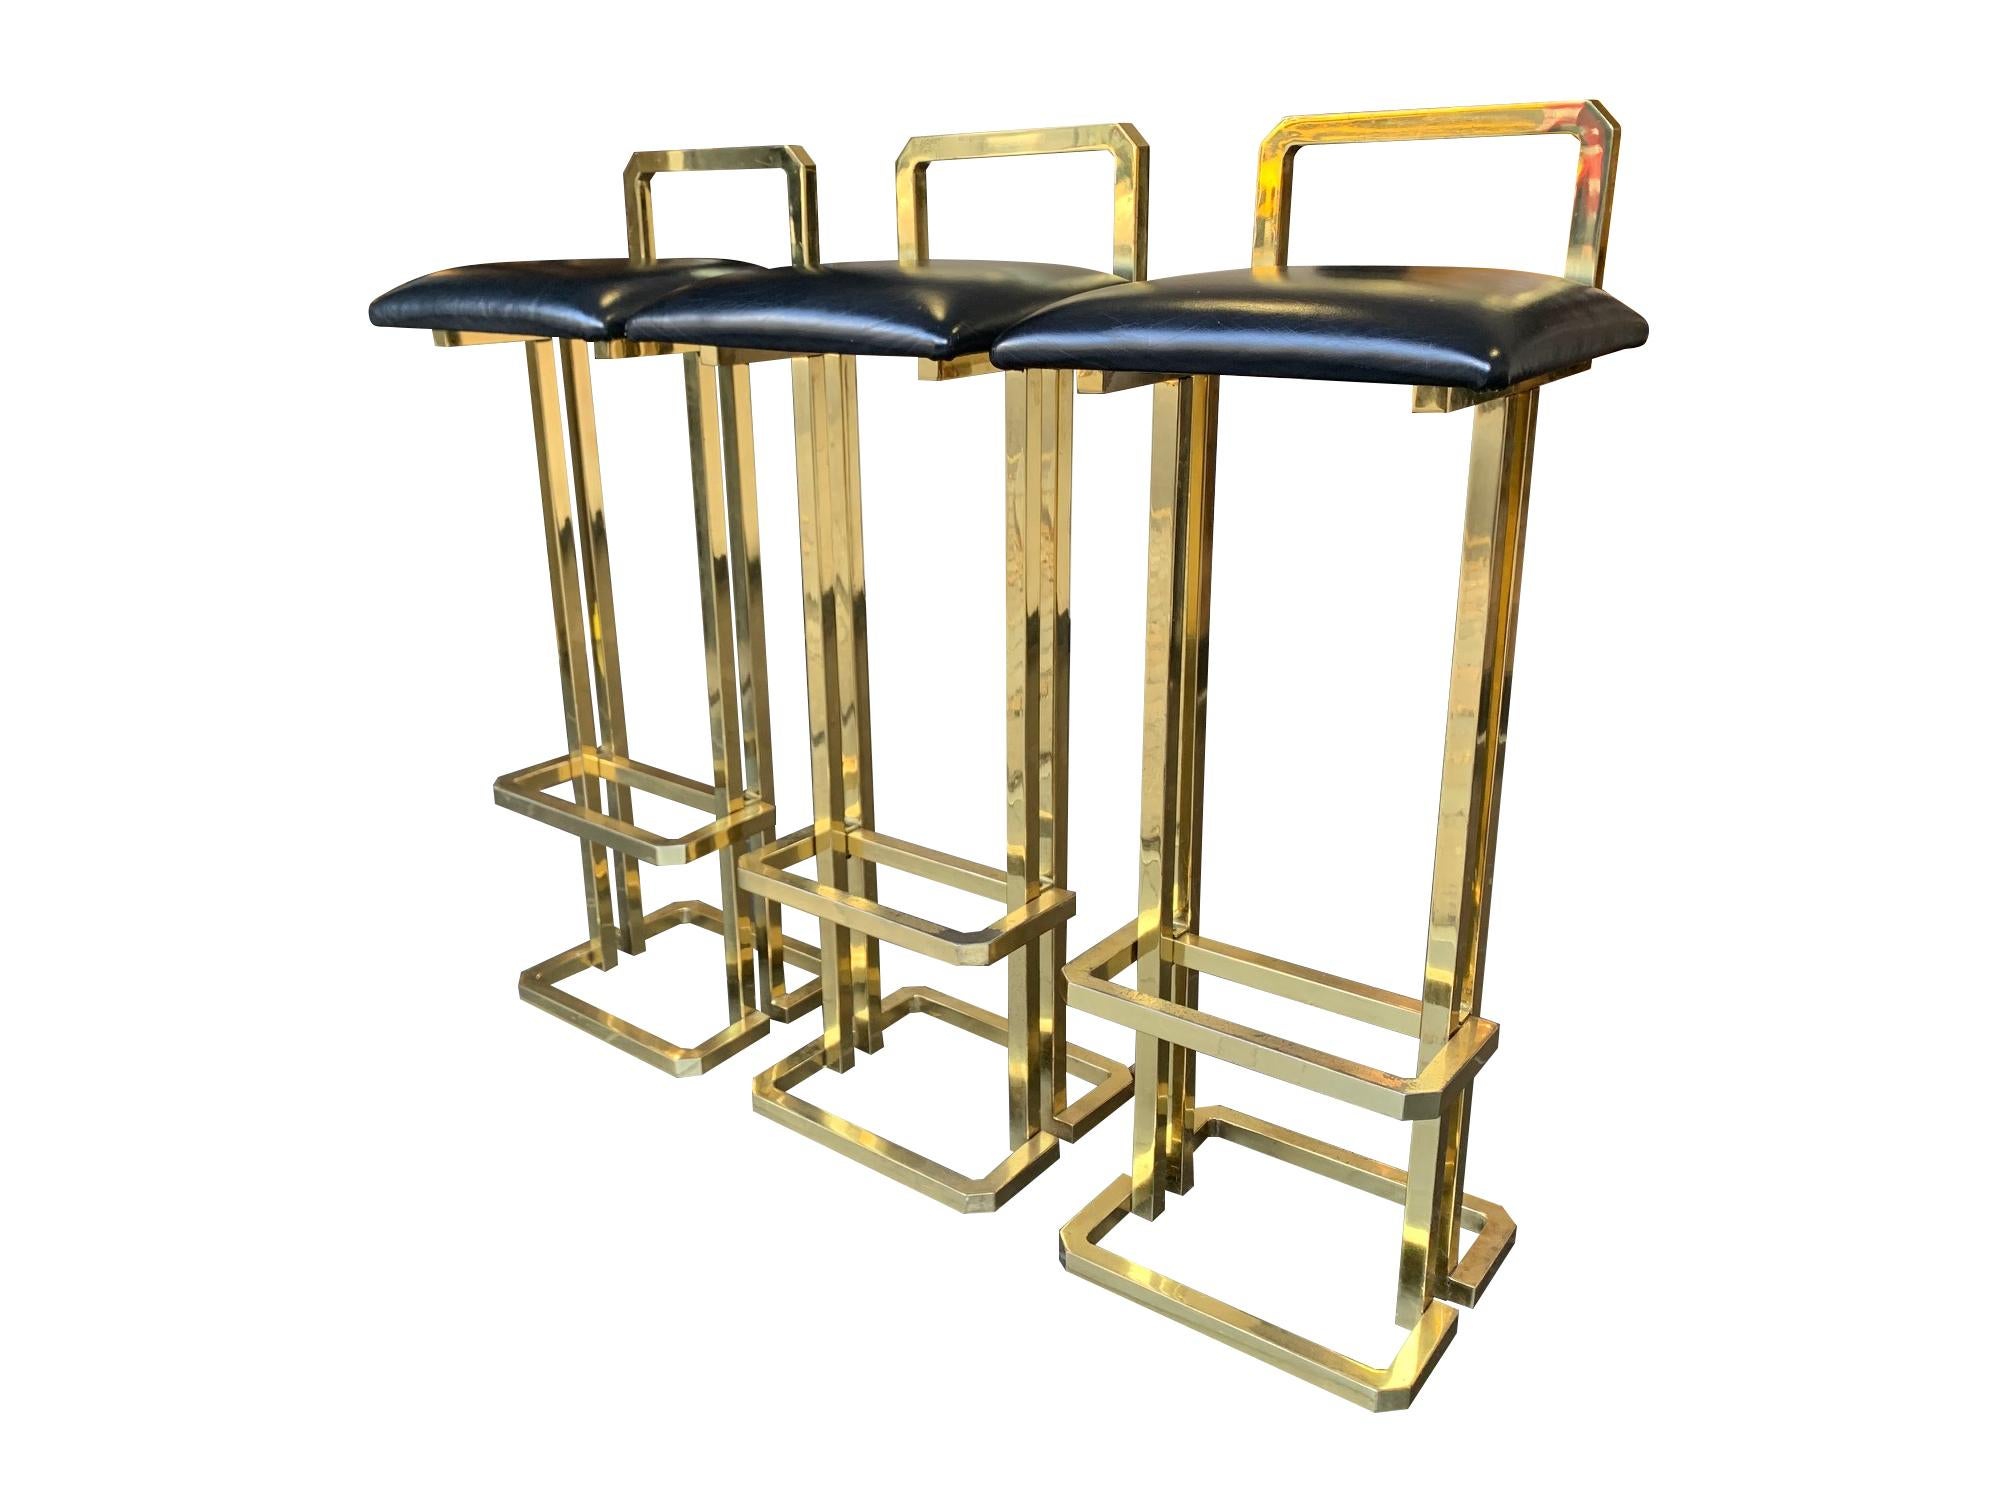 Set of 3 Maison Jansen Style Gilt Metal Stools with Black Leather Seat Pads For Sale 12